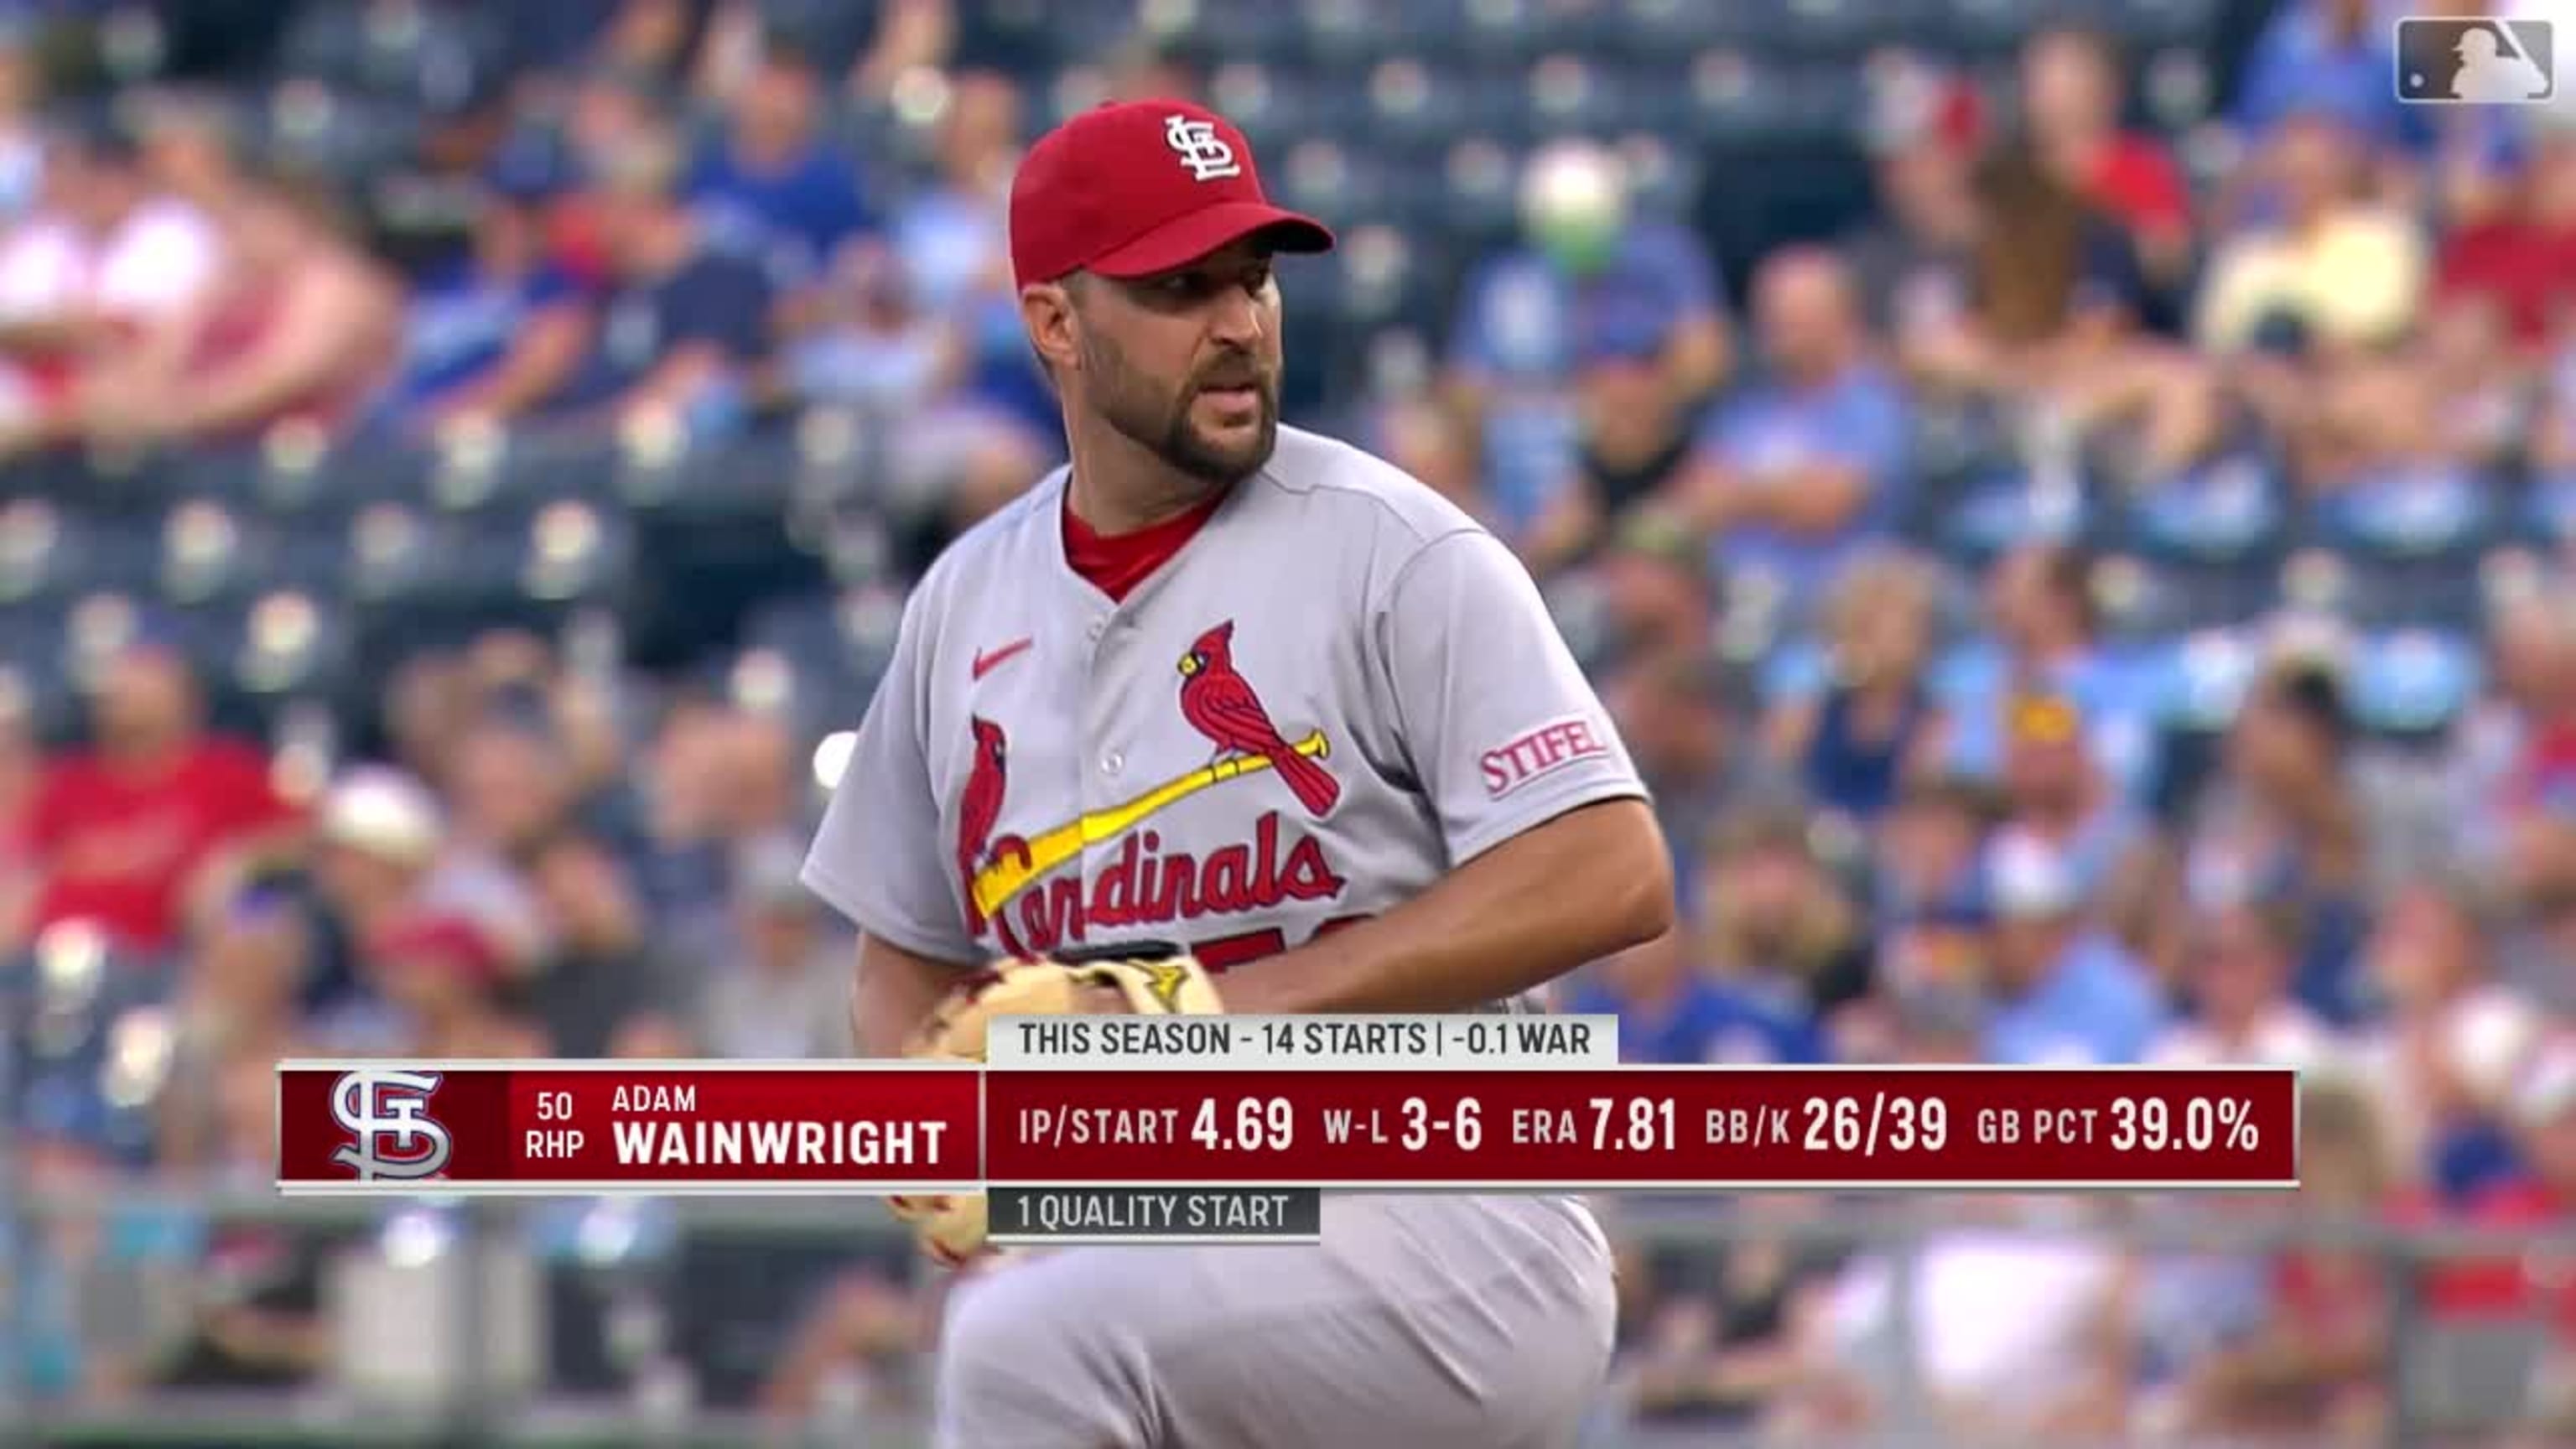 Wainwright chased after one inning, allowing eight runs in